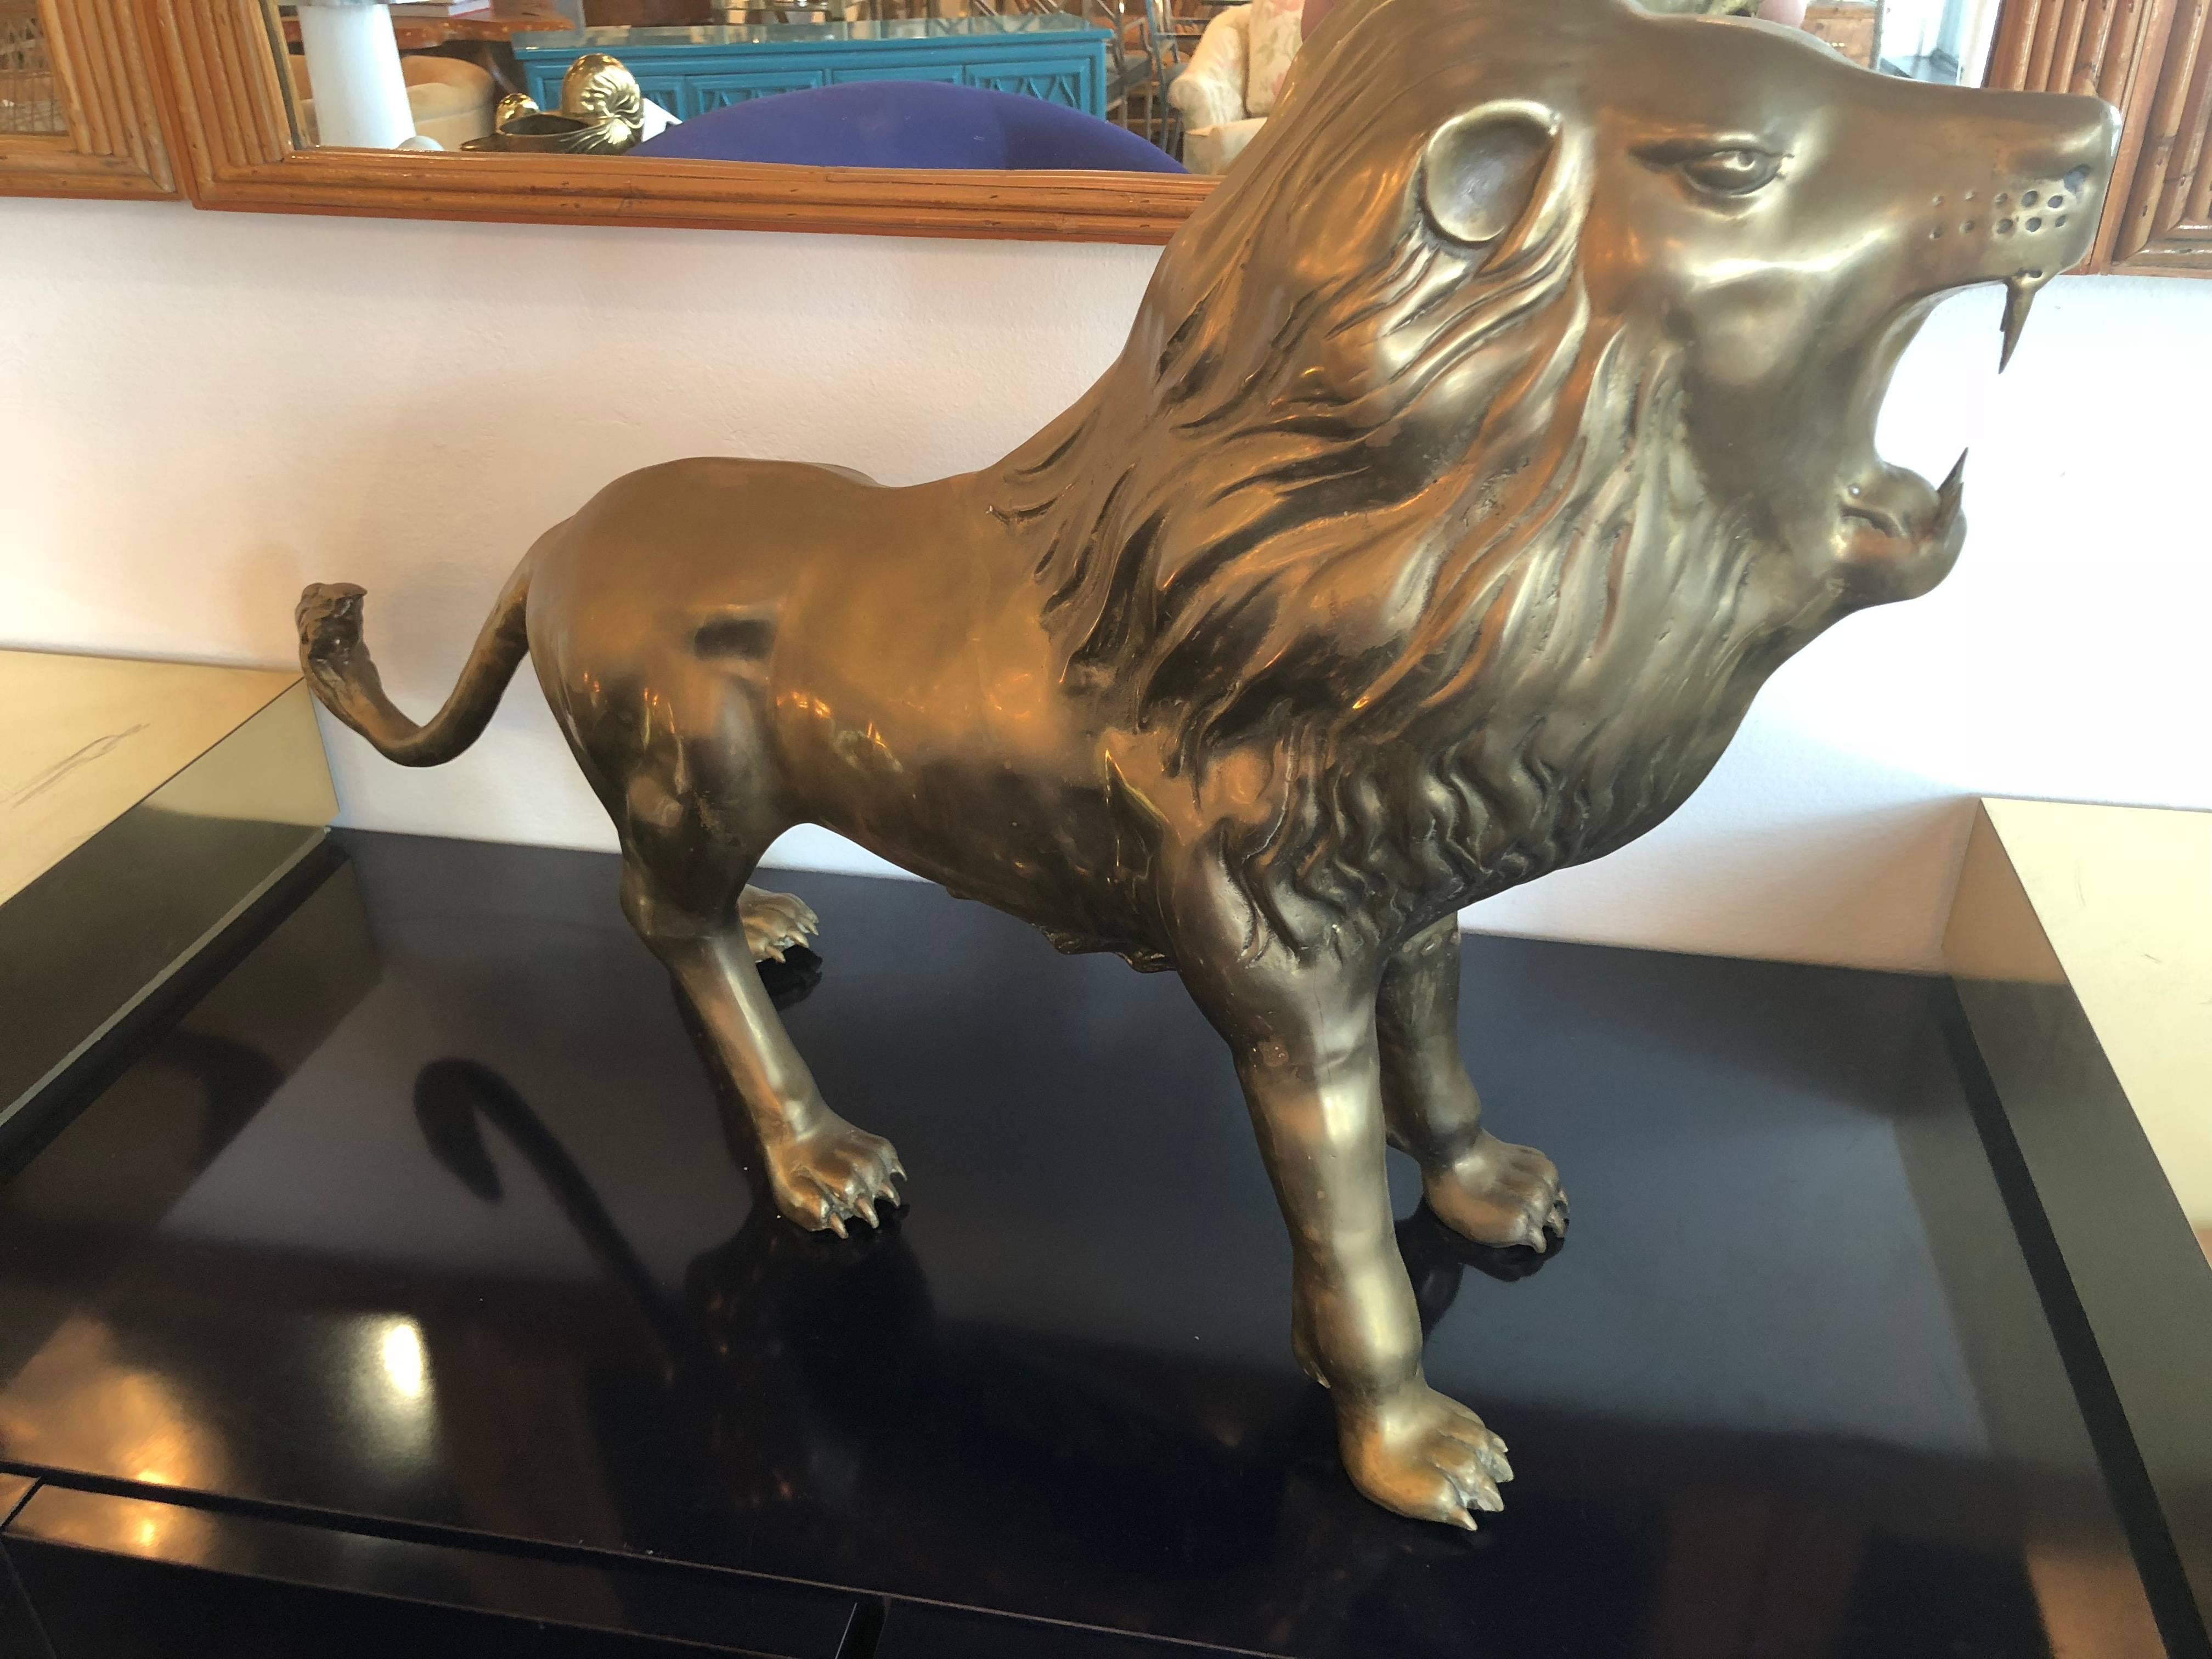 Vintage brass lion statue with original brass patina. This can be polished for an additional charge if you prefer the shiny look.